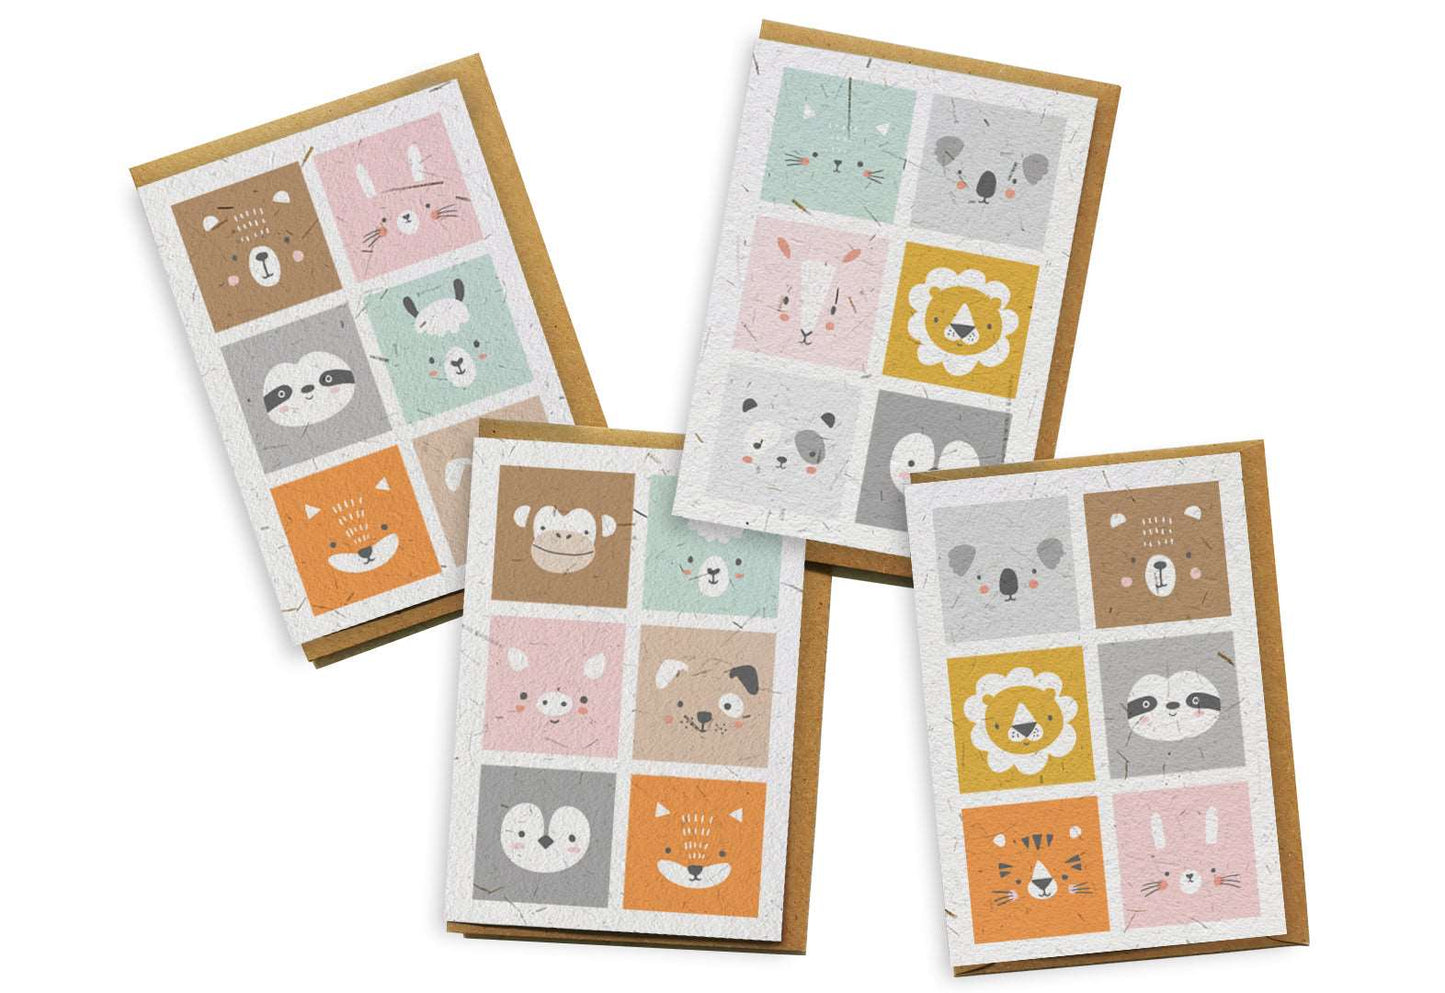 Plantable Seed Paper Card 4-Pack - Peeper Greeting Card Little Green Paper Shop